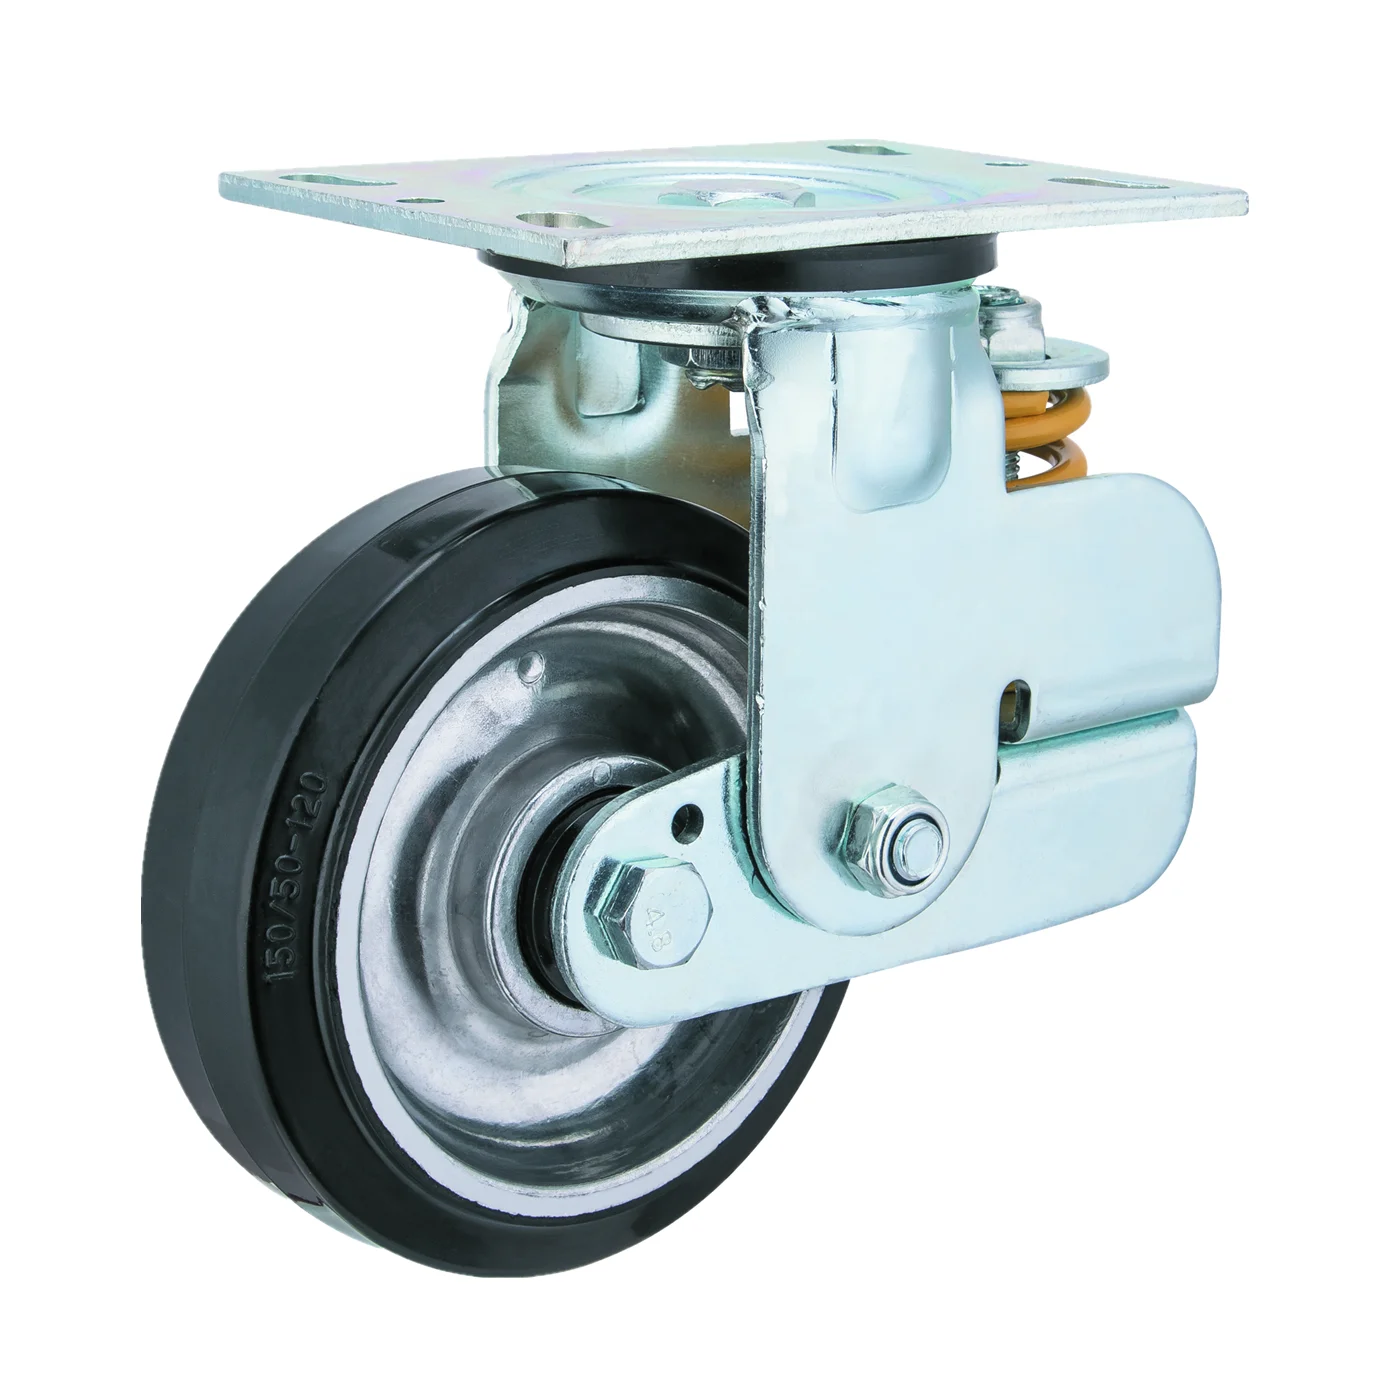 6 8 Inch Heavy Duty Industrial Single Spring Loaded Swivel Caster Shock Absorption Aluminum Core rubber Casters And Wheels